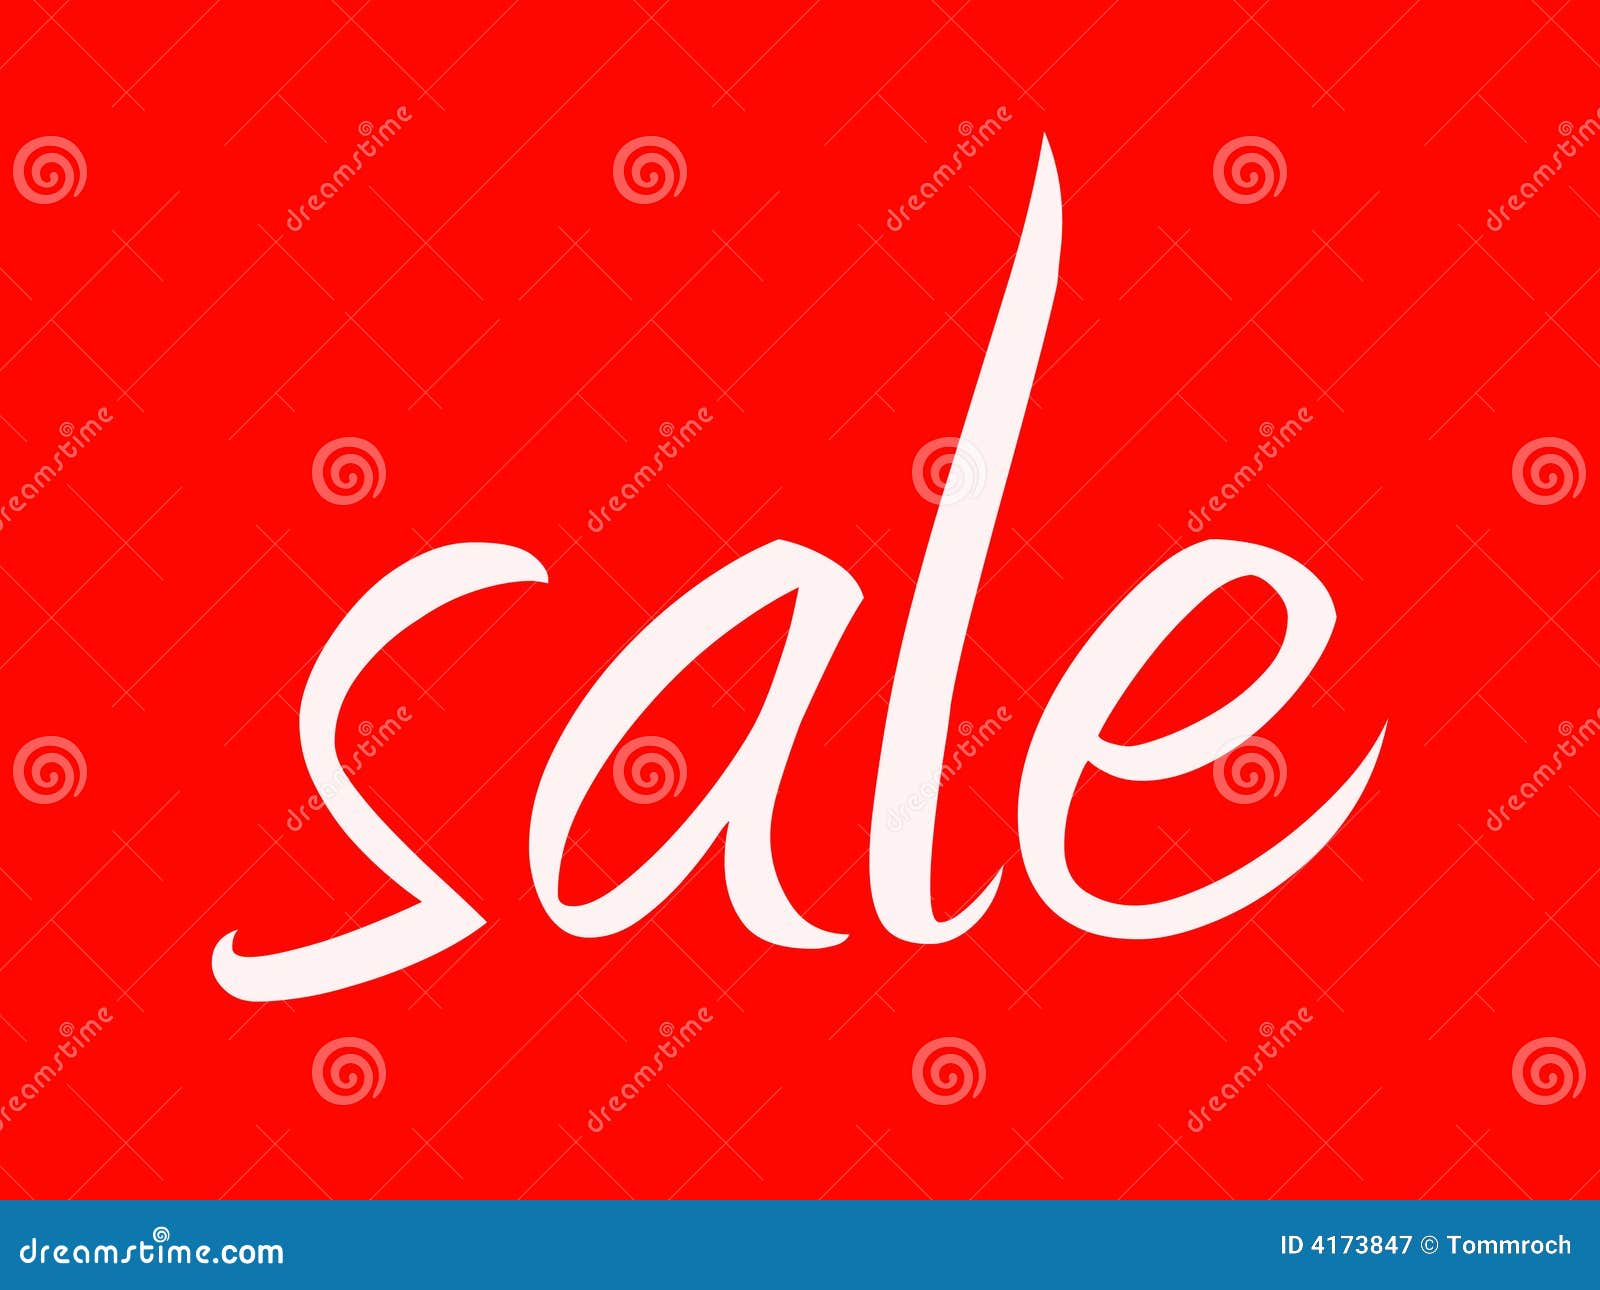 8,288 Womens Clothes Sale Images, Stock Photos, 3D objects